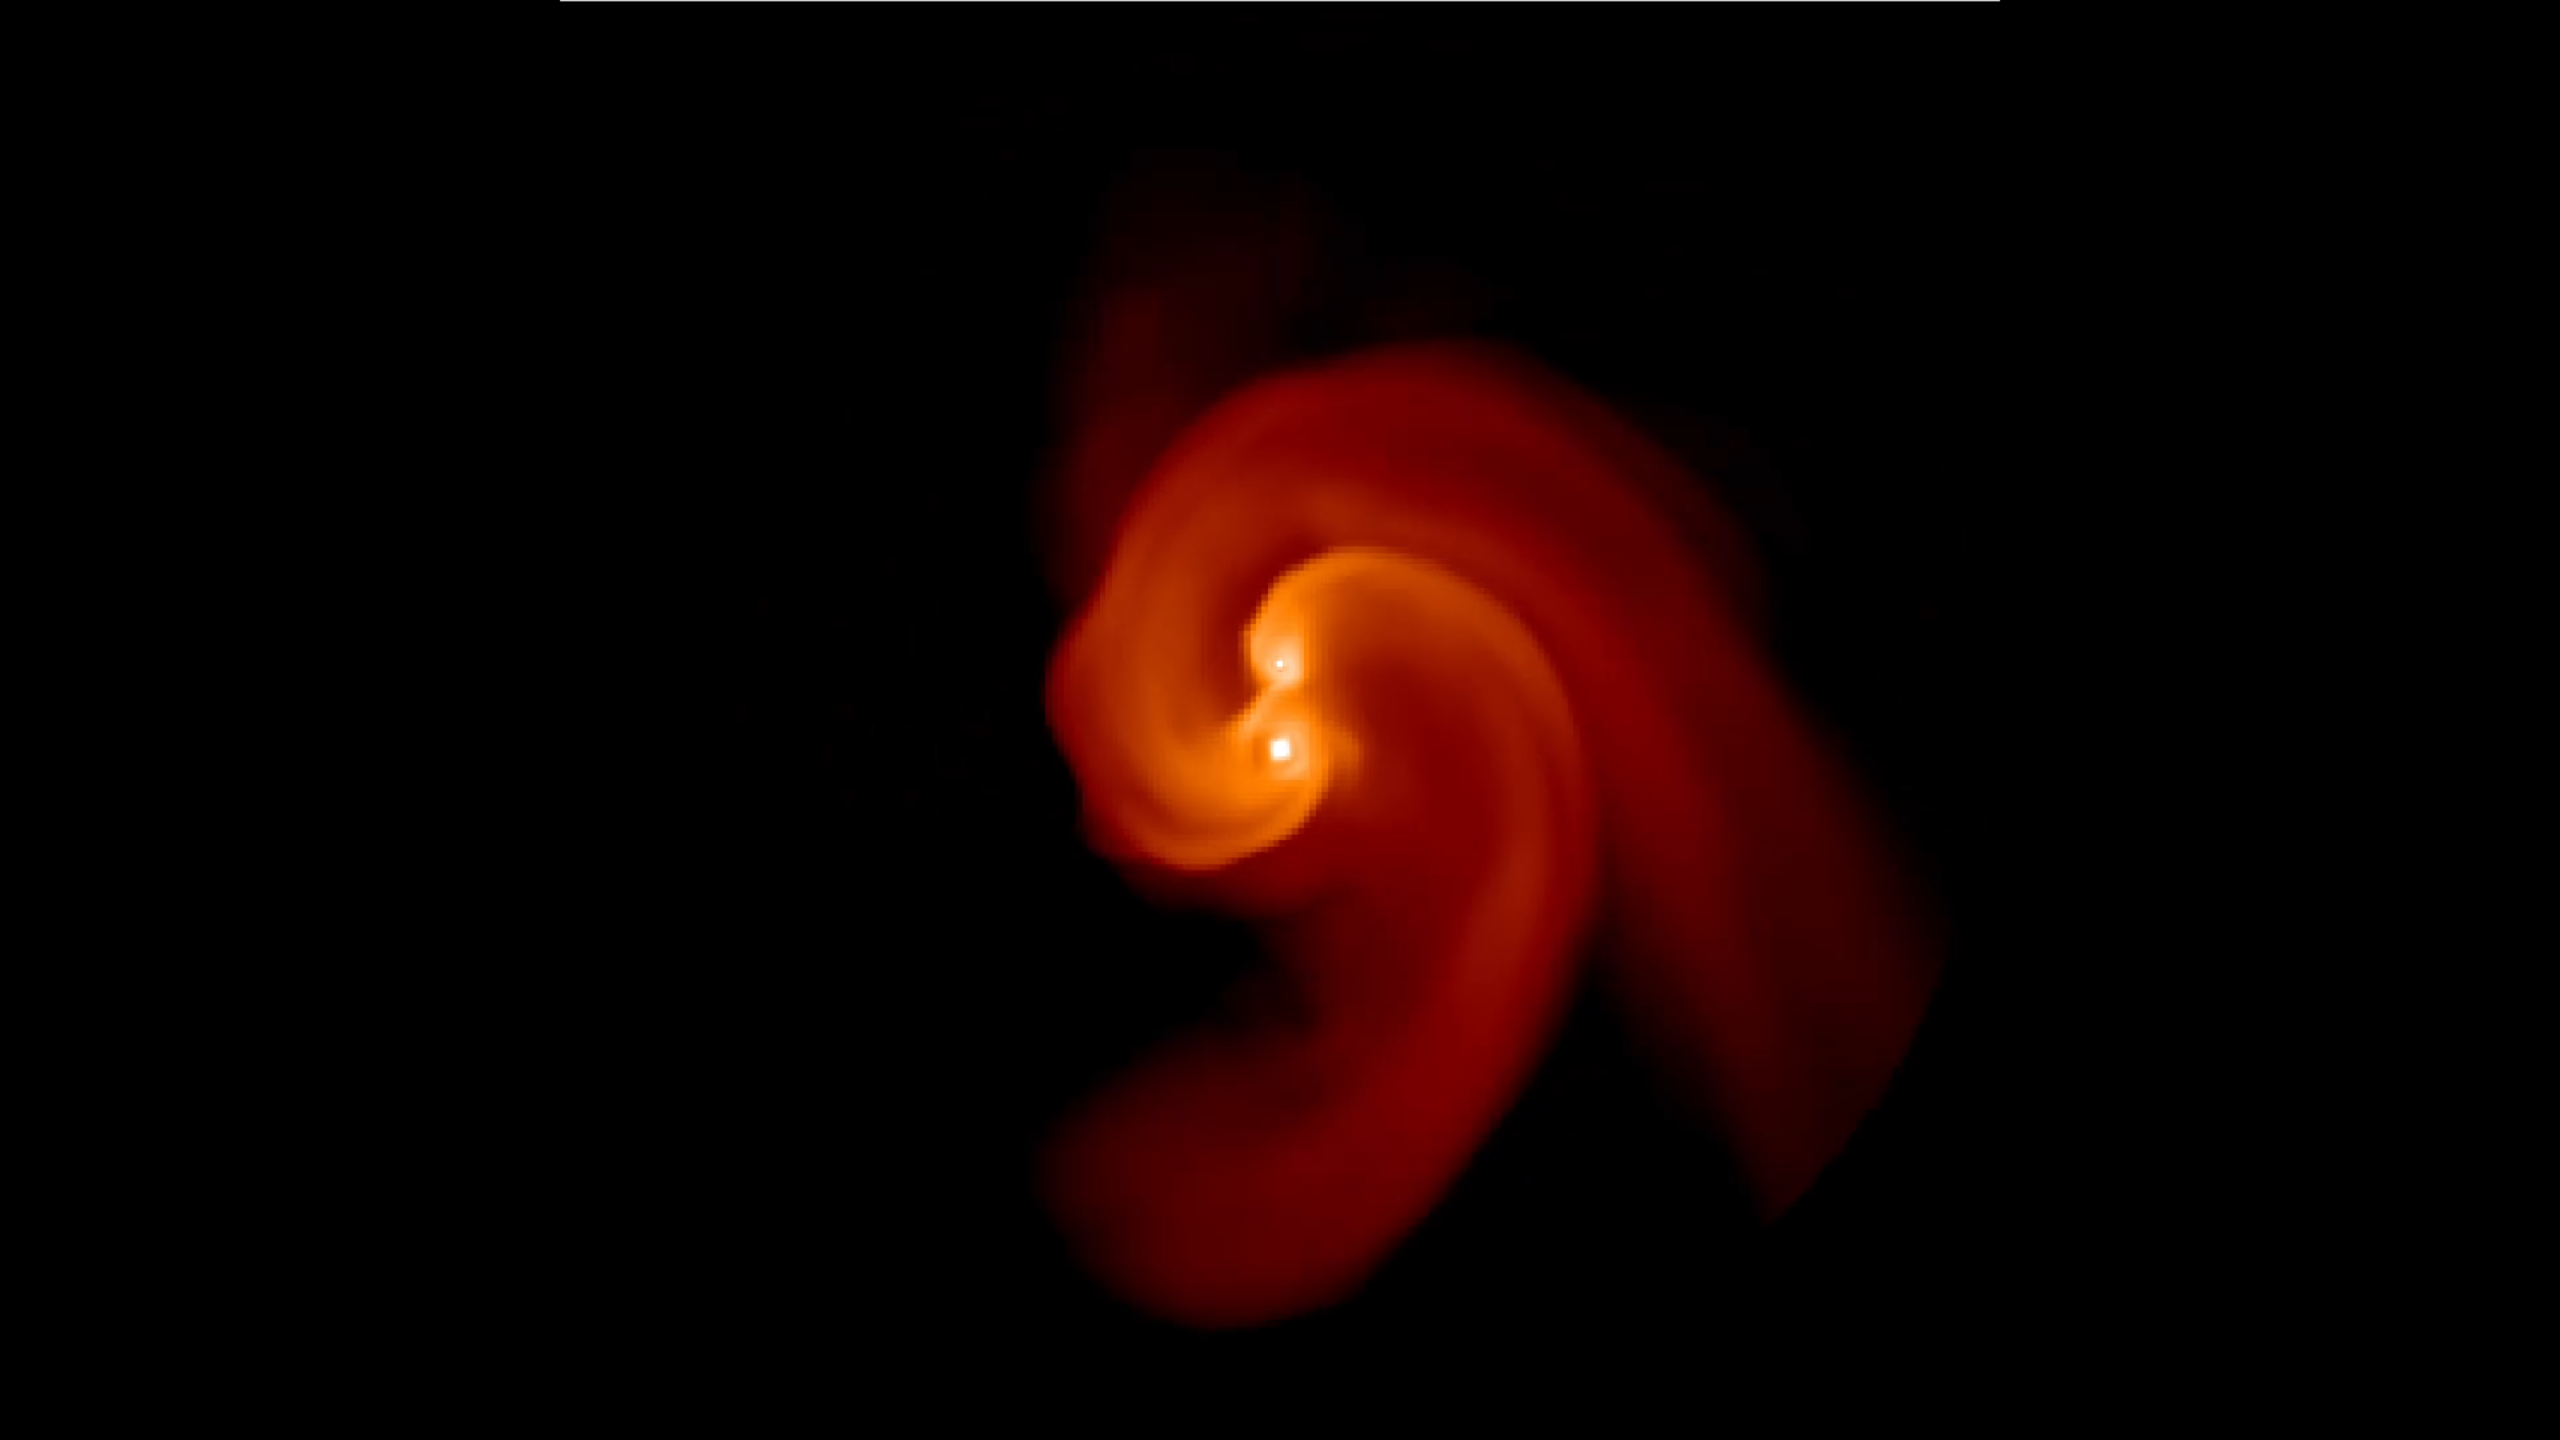 An early simulation of a binary star system whose initial conditions are inferred from R Sculptoris. The goal of these simulations is to compare final morphologies given initial mass ratios in order to infer the mass of the secondary.